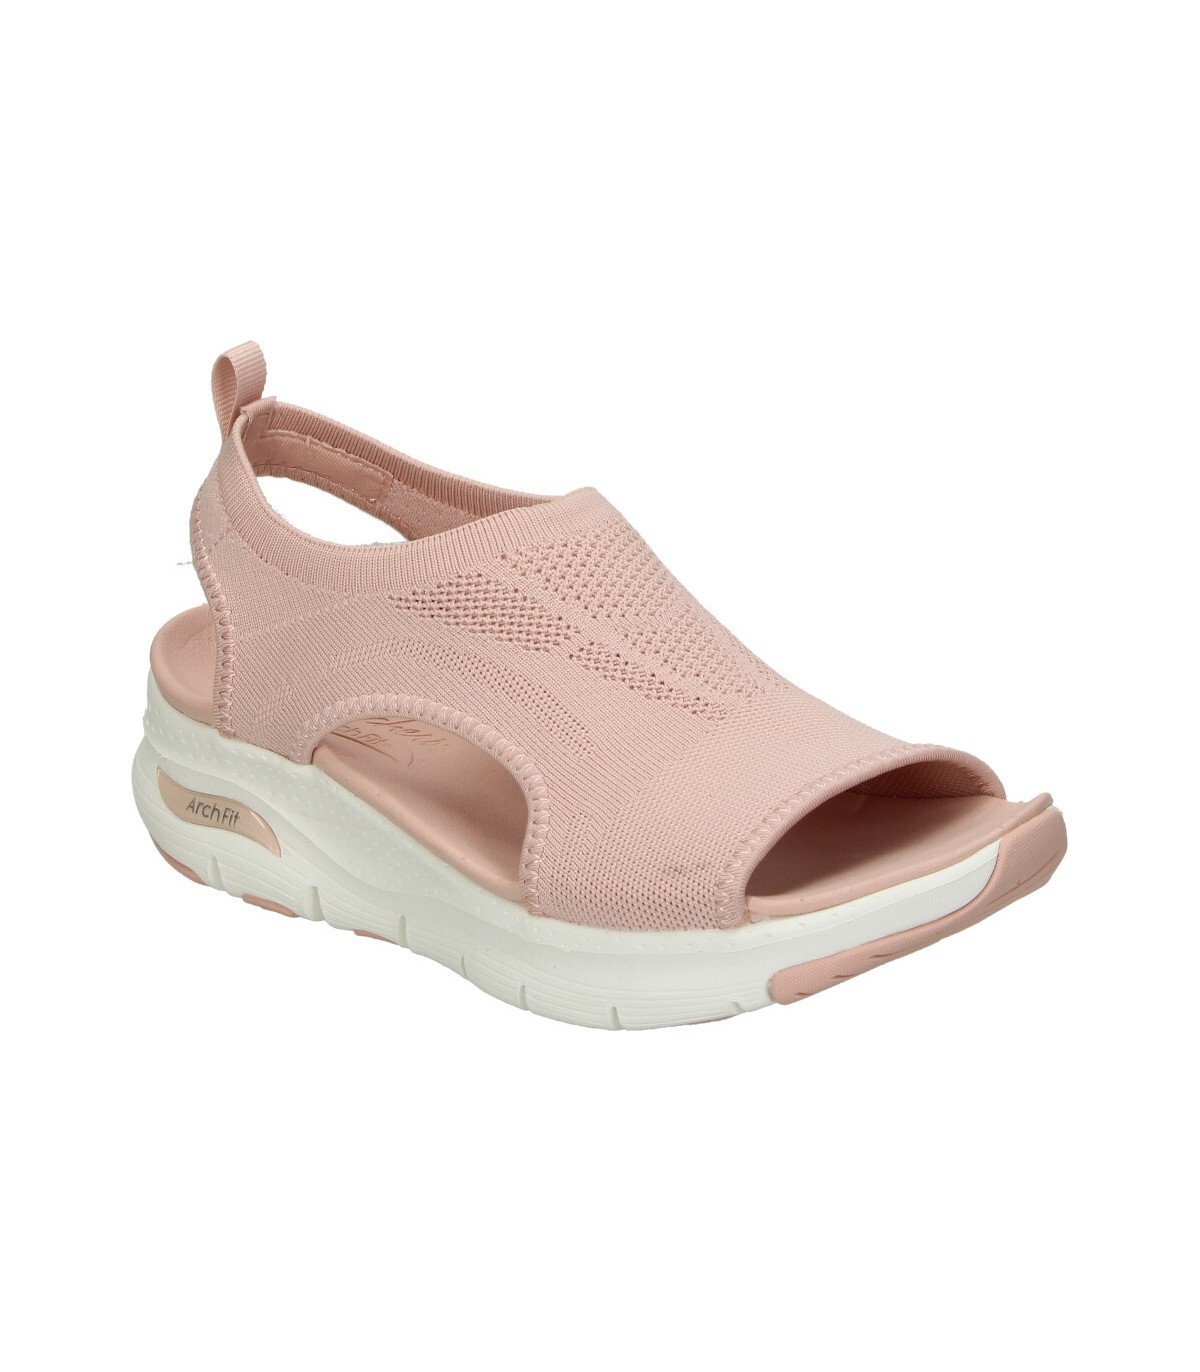 para mujer Skechers Arch Fit - City Envío 24h-72h.